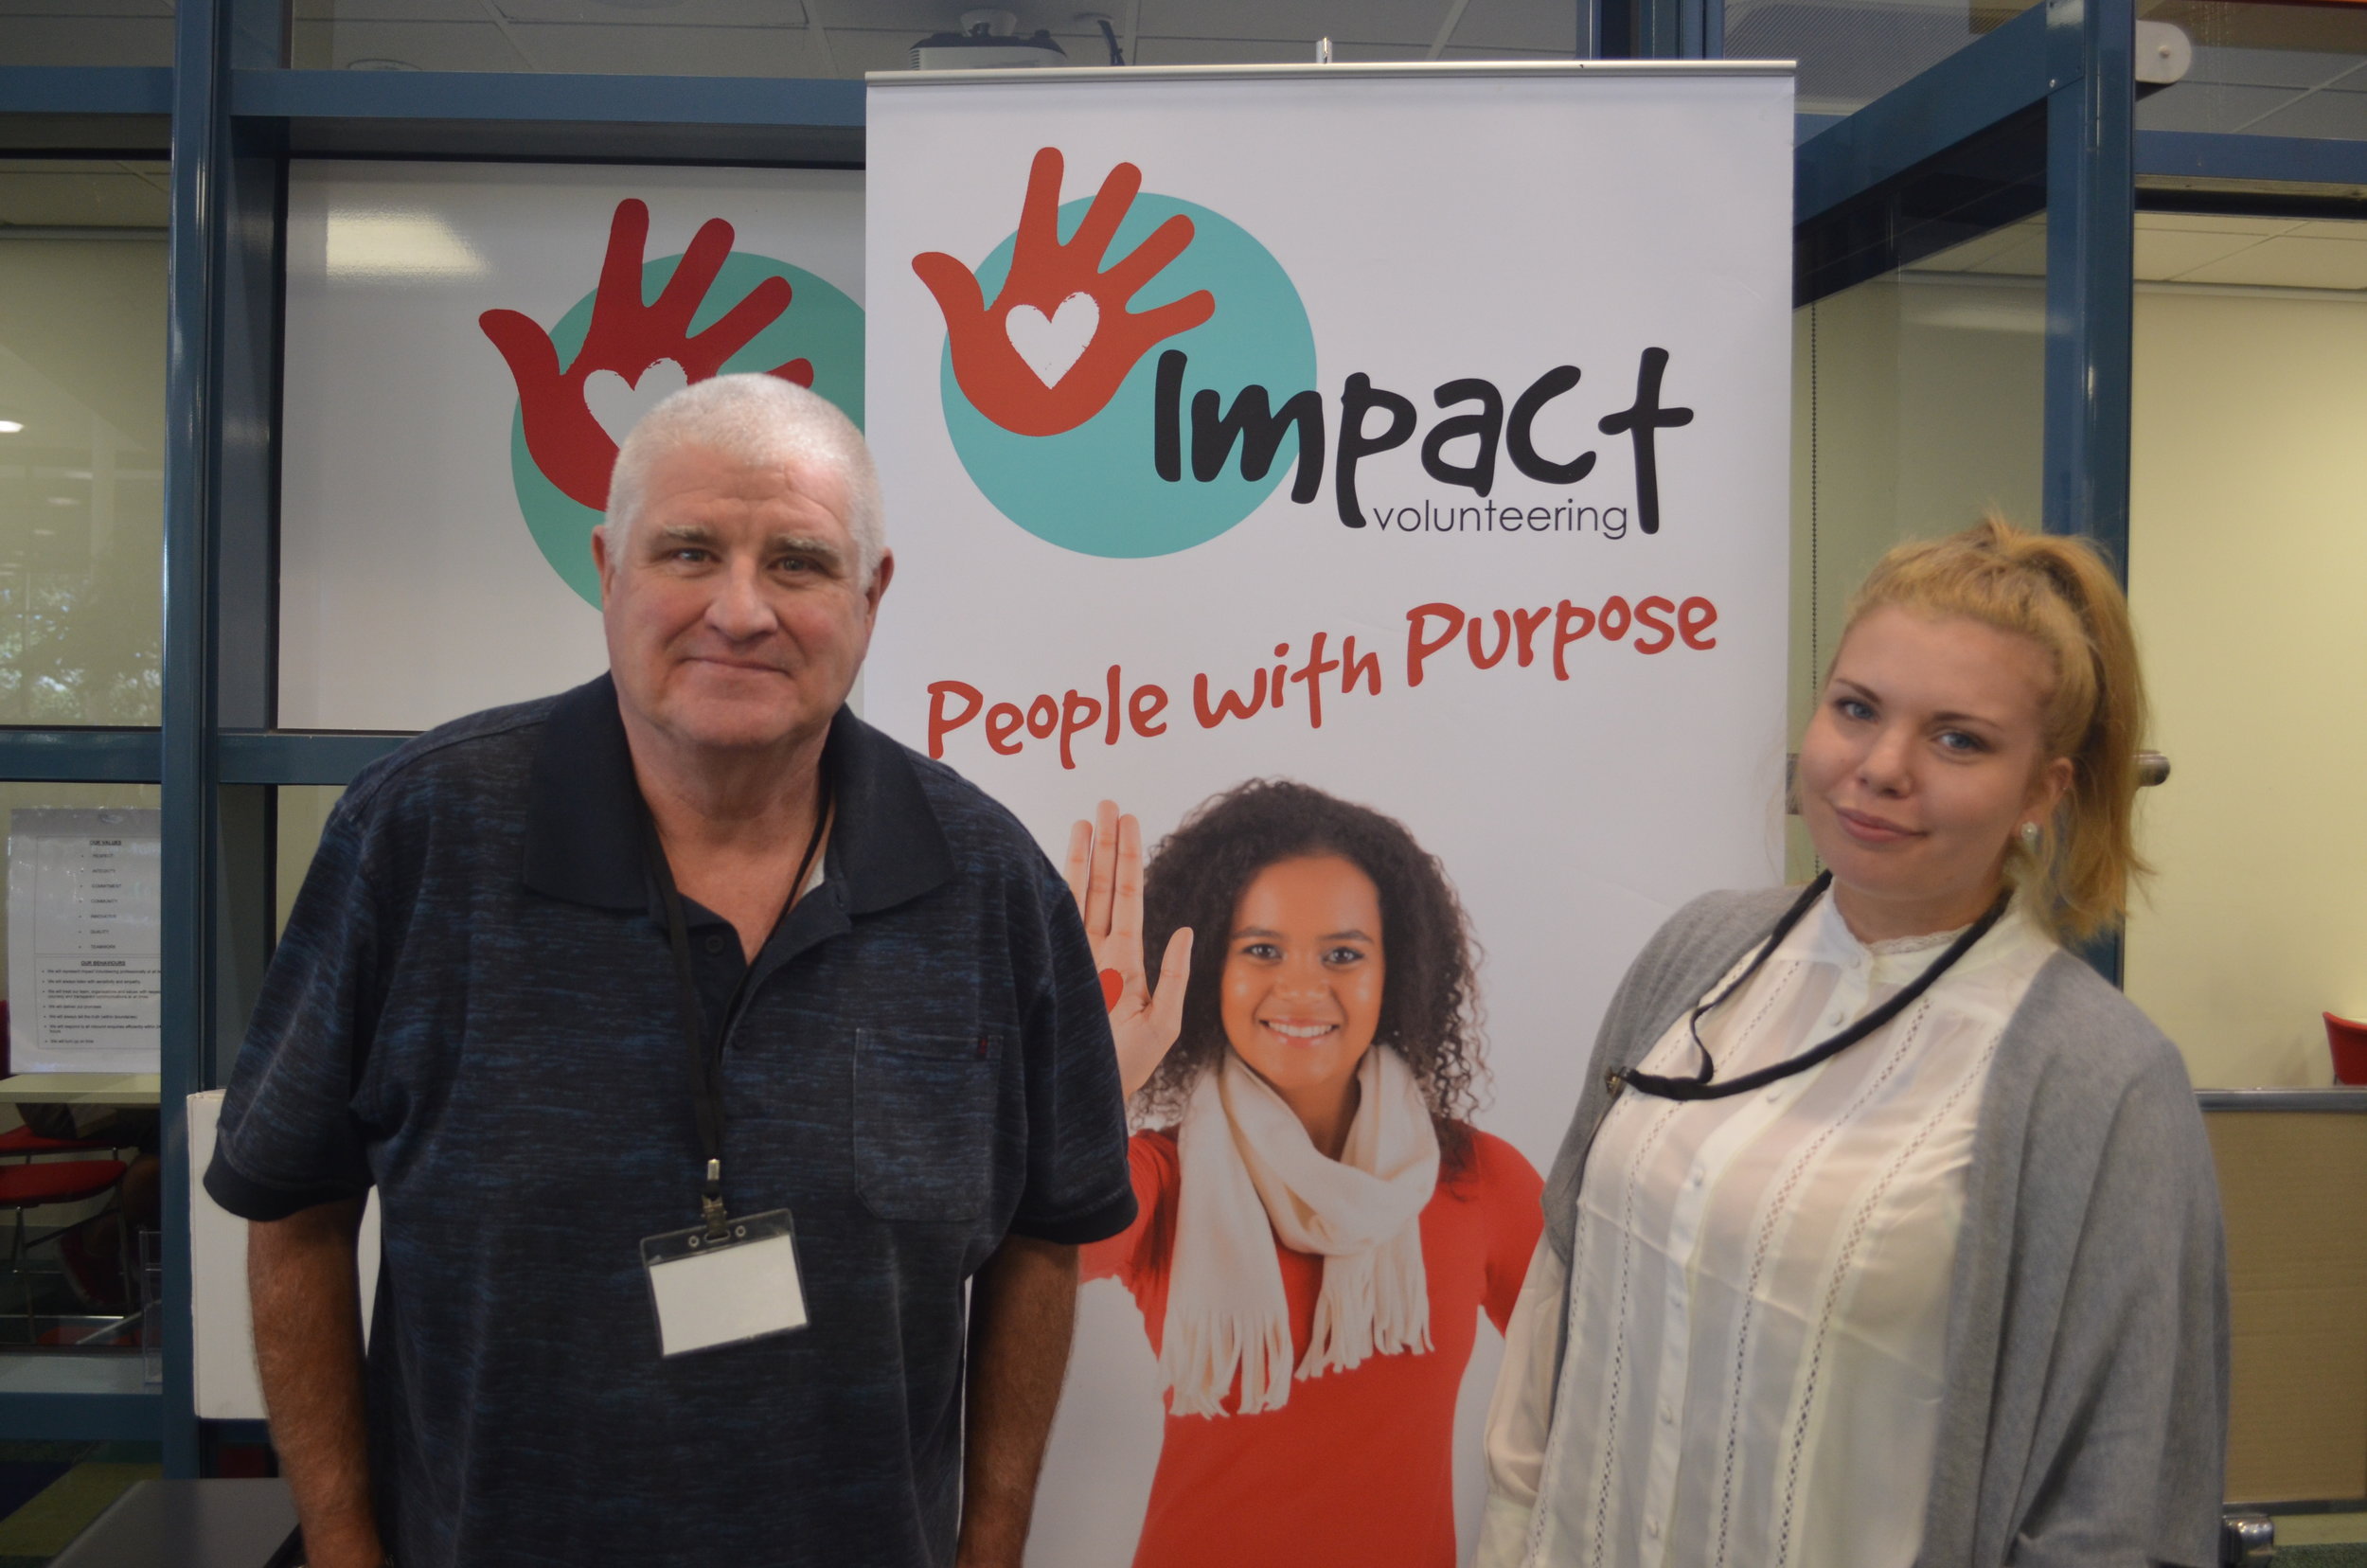 Volunteers Mark and Sharnie at the Impact Information and Referral Desk in Frankston Library.